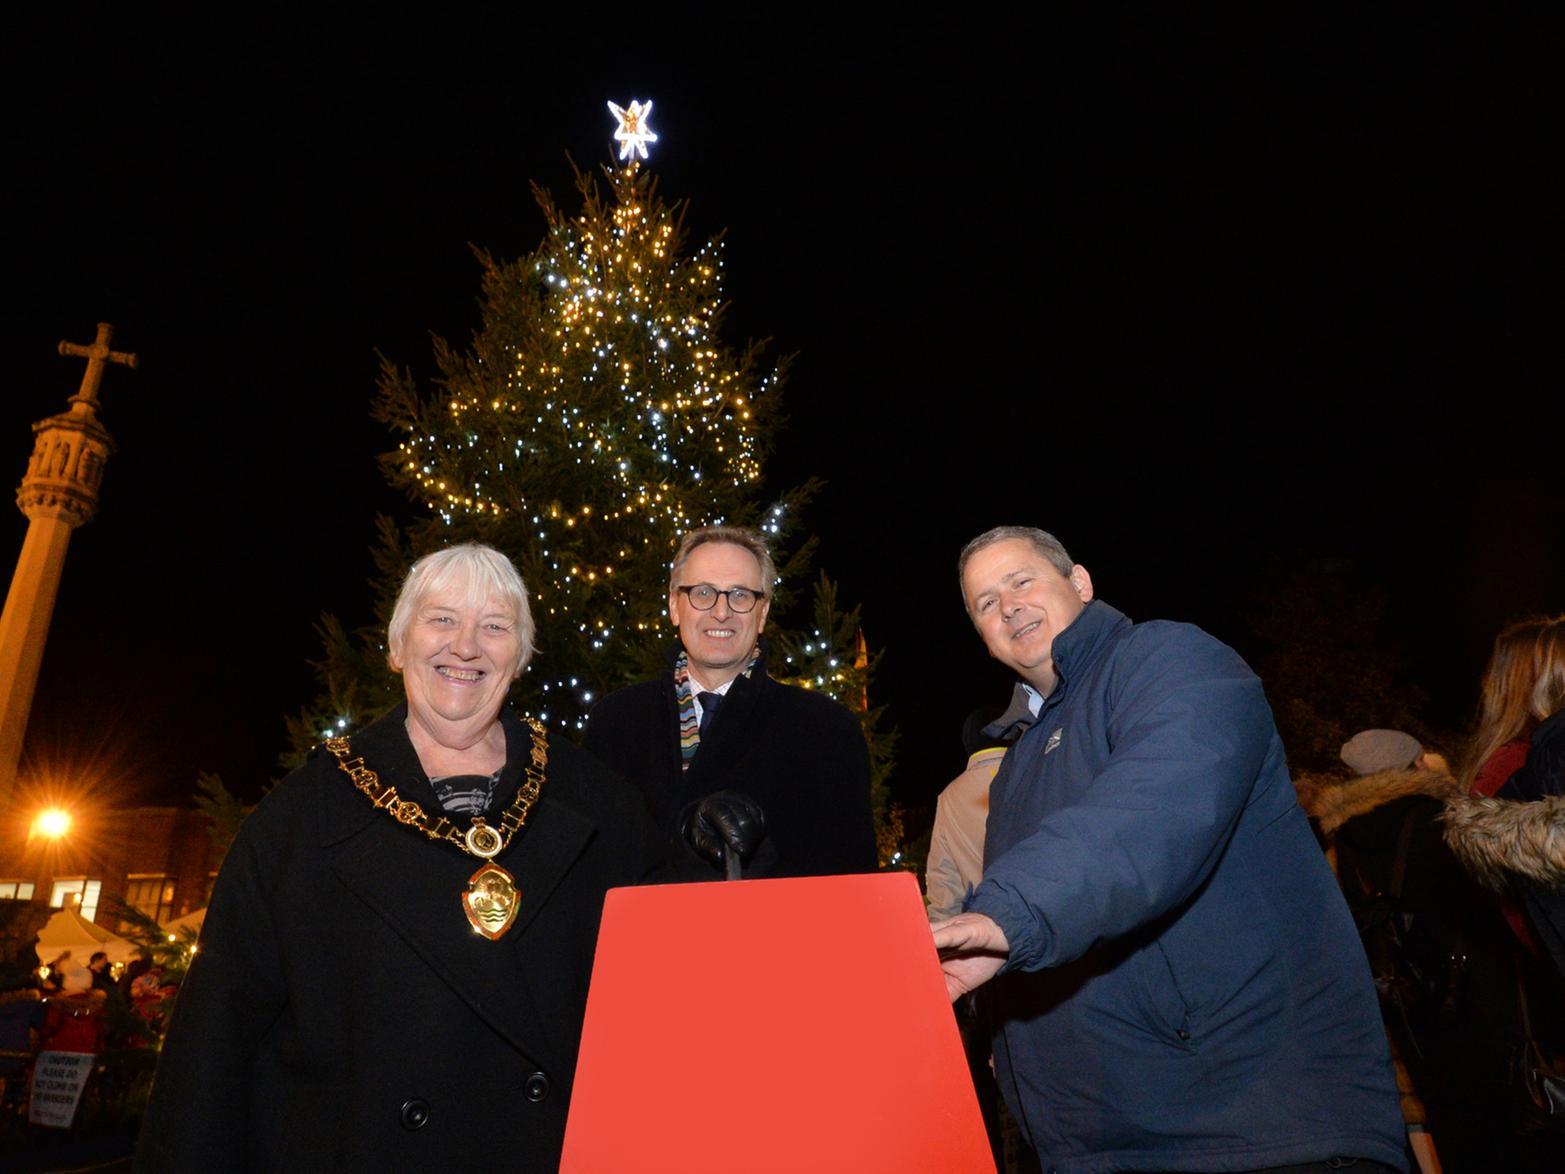 Chairman of Harborough District Council Barbara Johnson, Mark Robinson chief executive of Market Harborough Building Society and leader Phil King switch on the Christmas Tree lights on the Square.